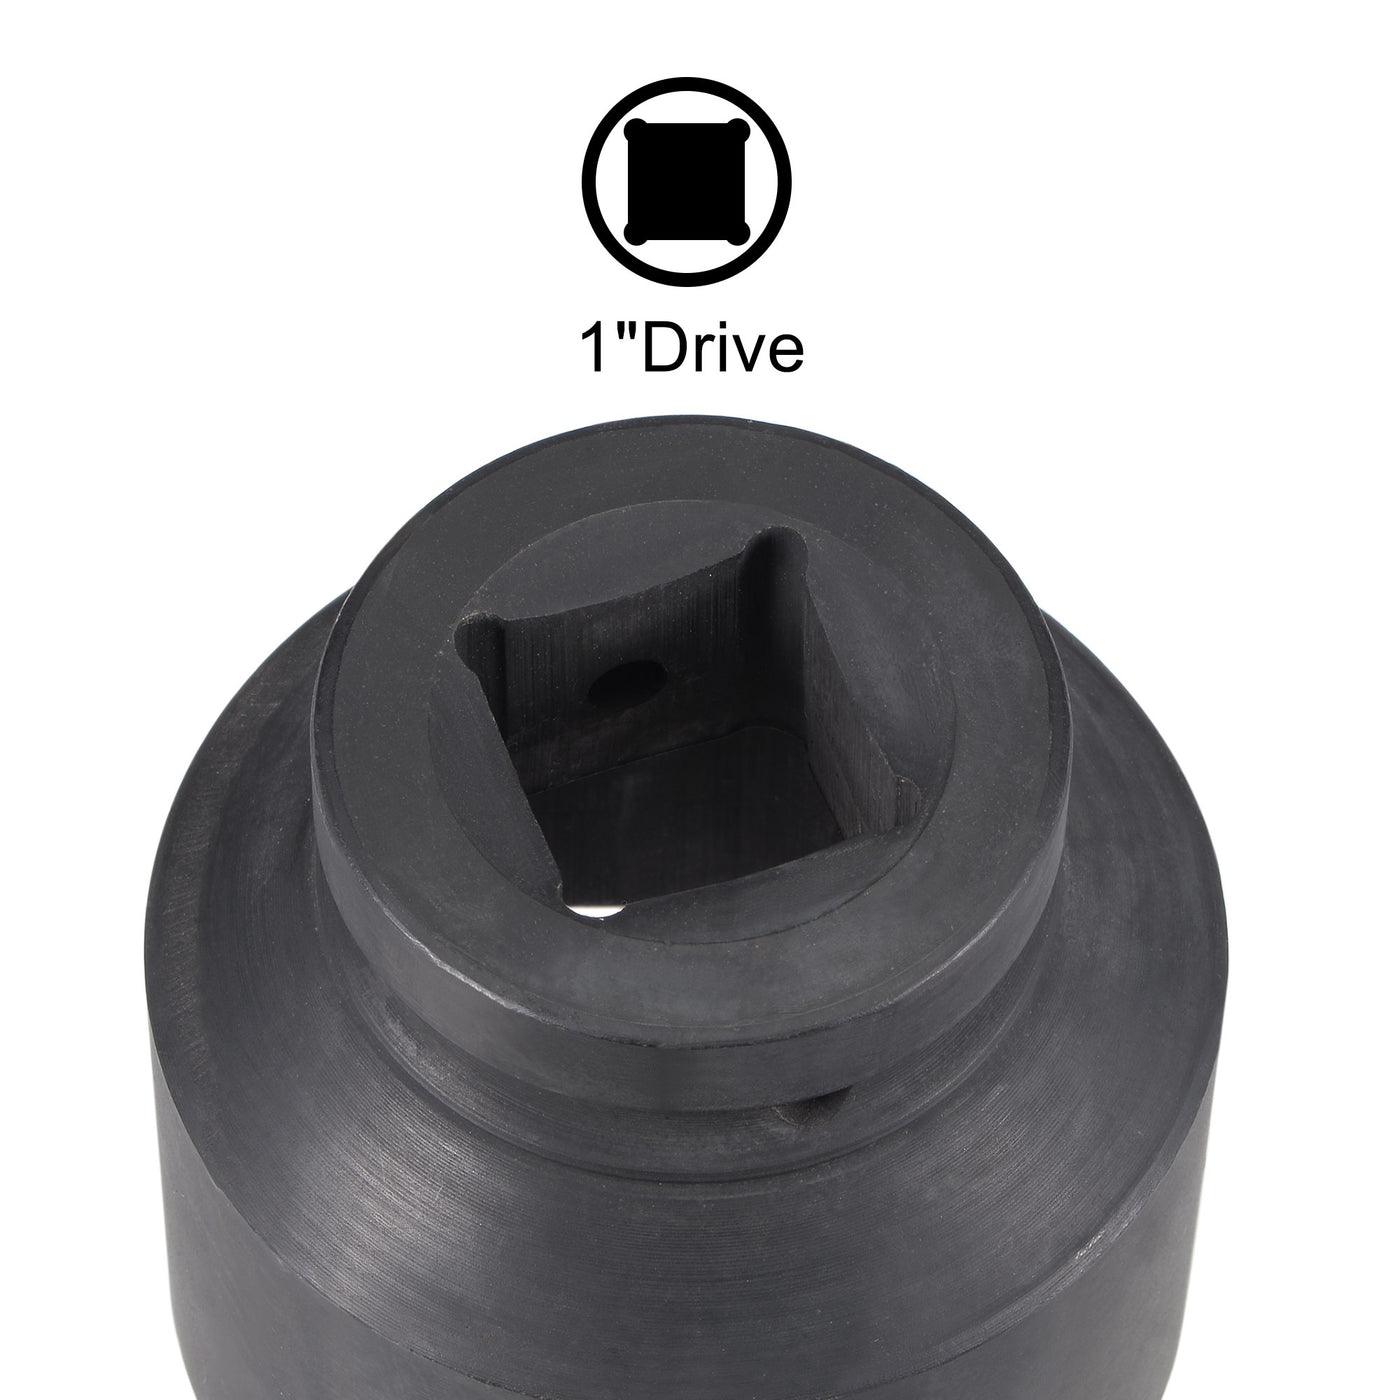 uxcell Uxcell 1-Inch Drive 60mm 12-Point Impact Socket, CR-MO Steel 84mm Length, Standard Metric Sizes